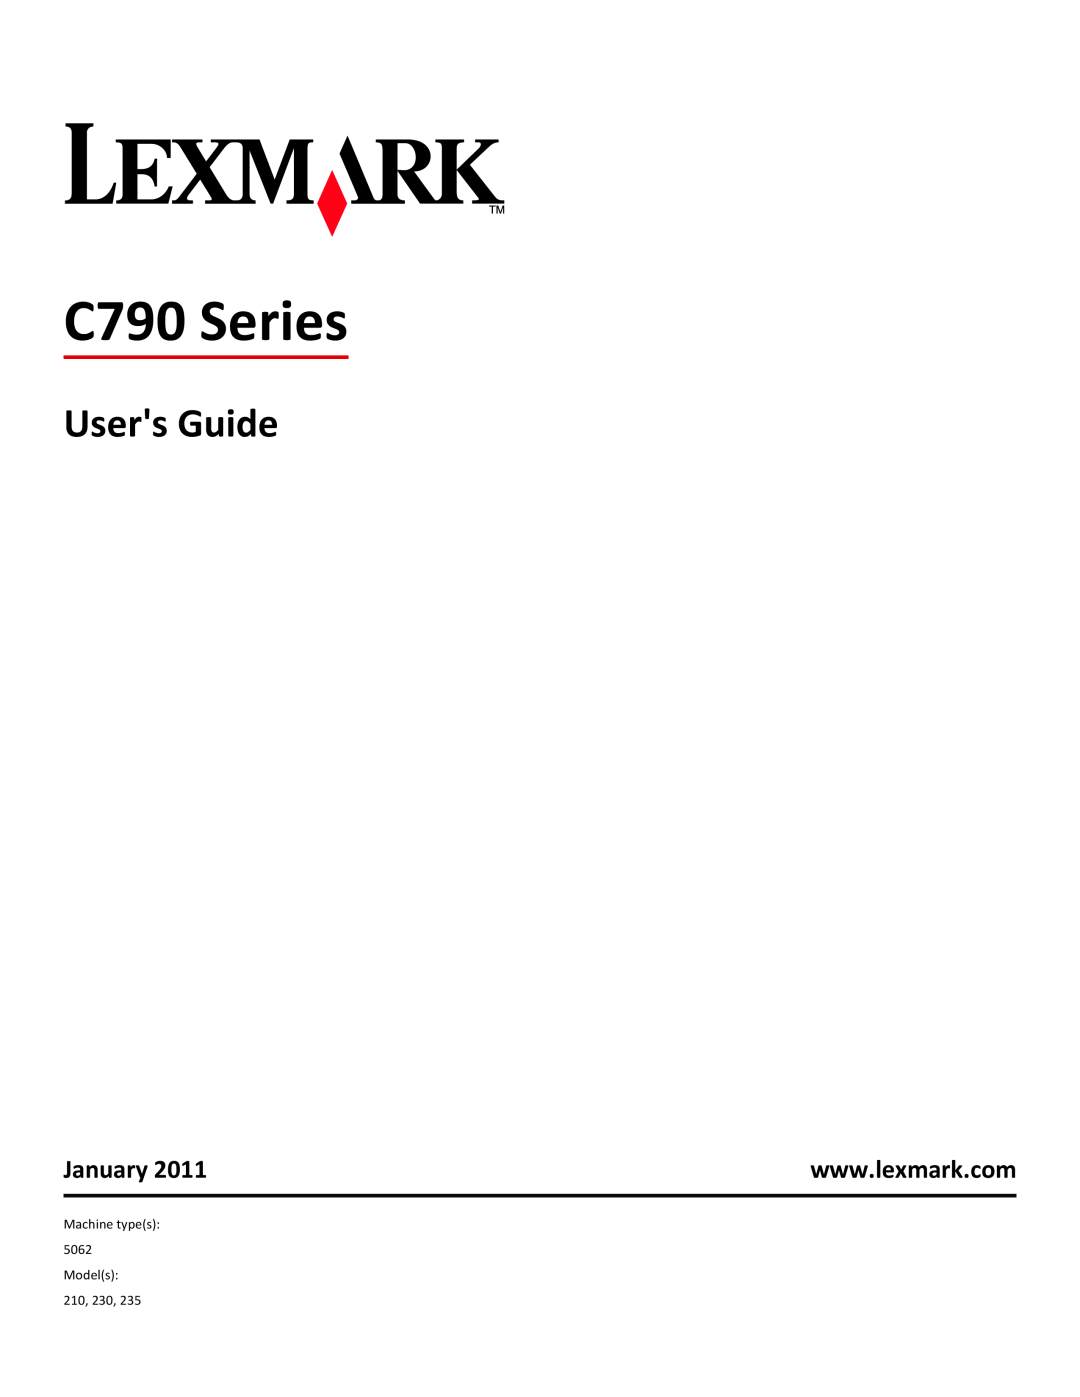 Lexmark manual Users Guide, January, C790 Series, Machine types 5062 Models 210, 230 